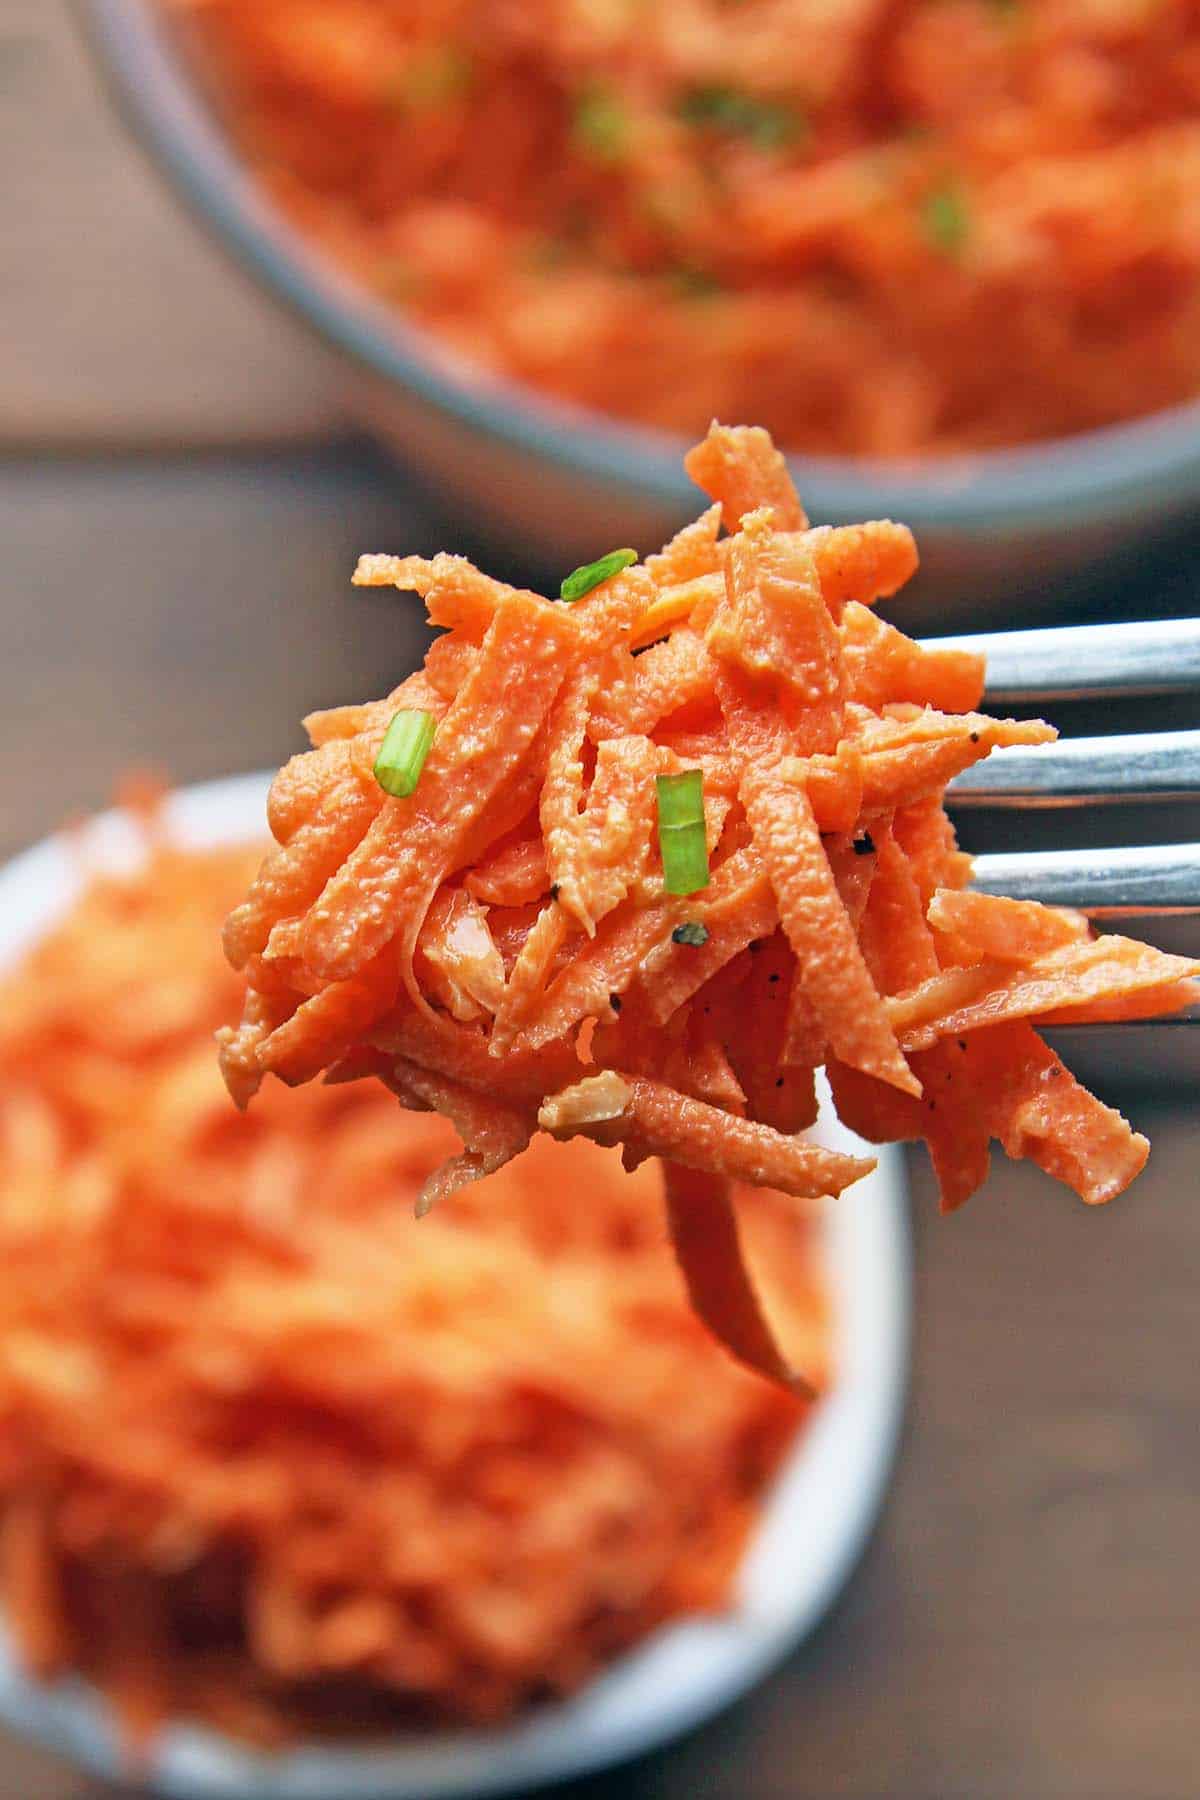 forkful of raw carrot salad